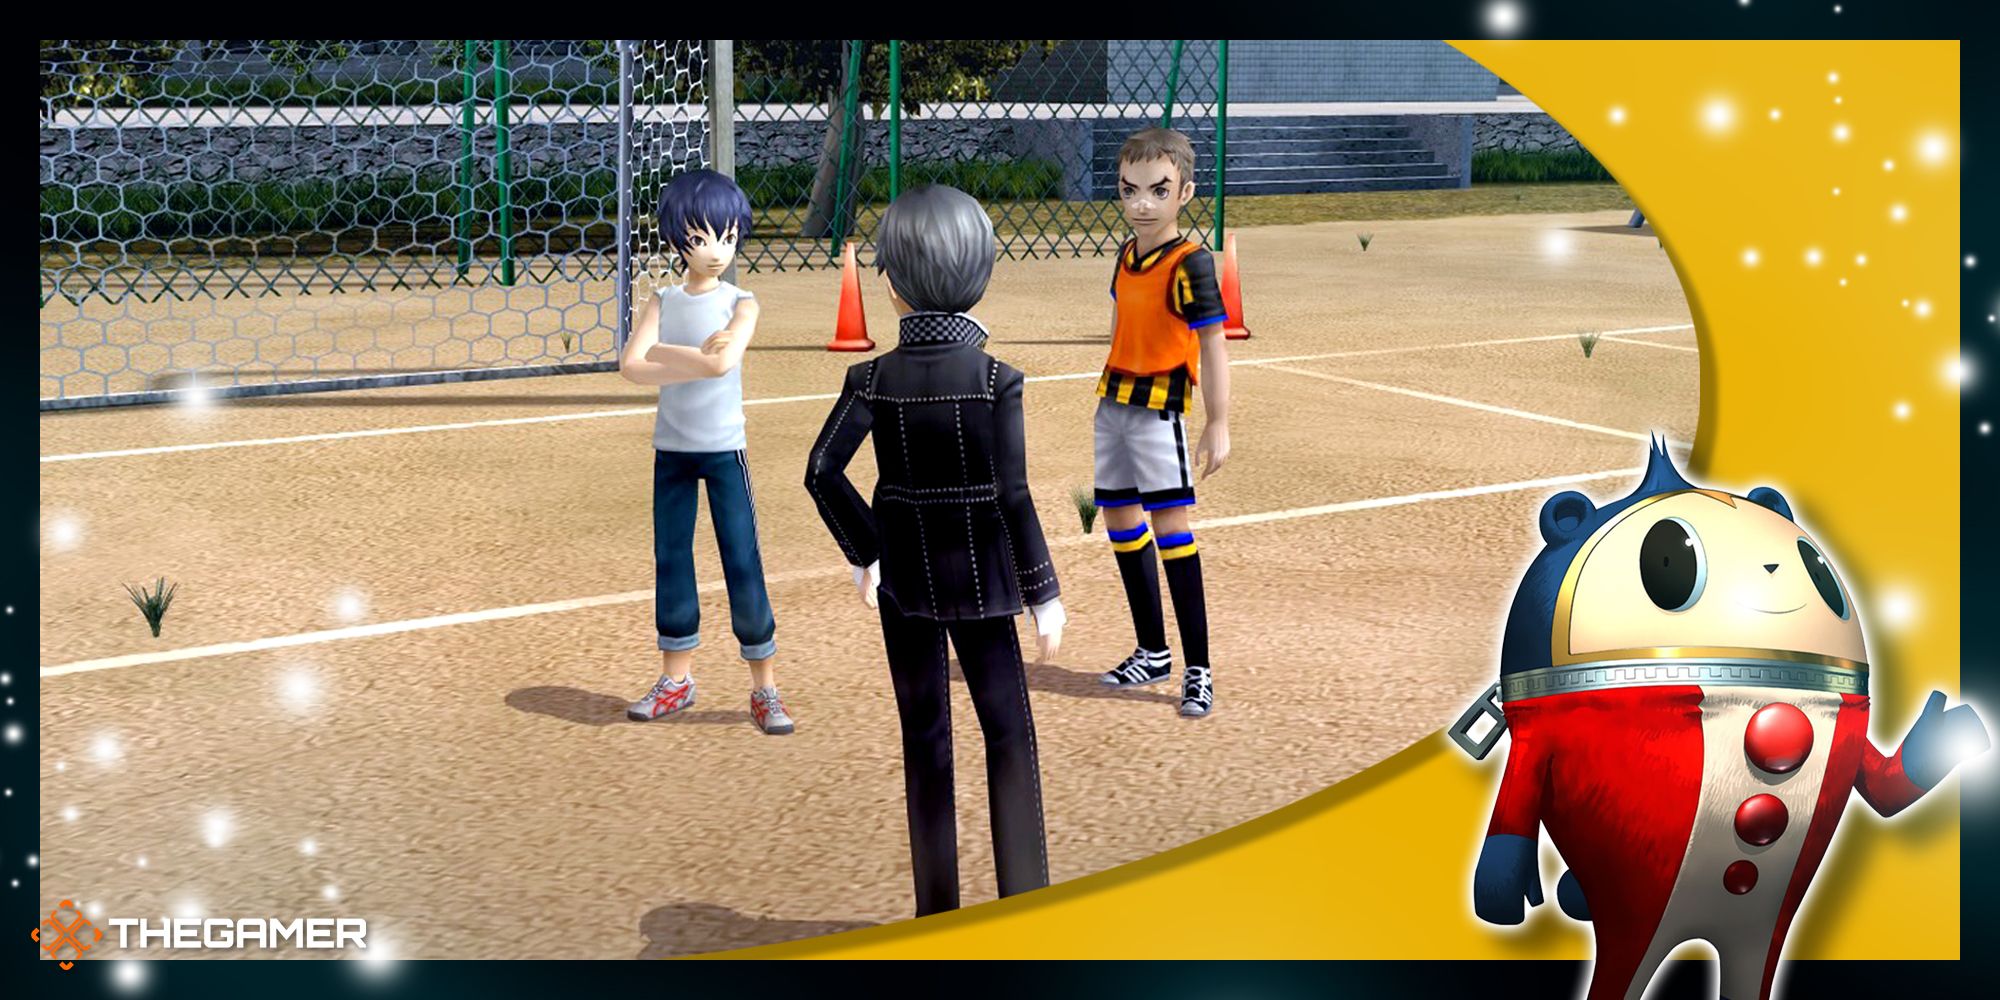 Persona 4 Golden - Yu and two other pupils on a football pitch with a Teddie overlay in the corner.